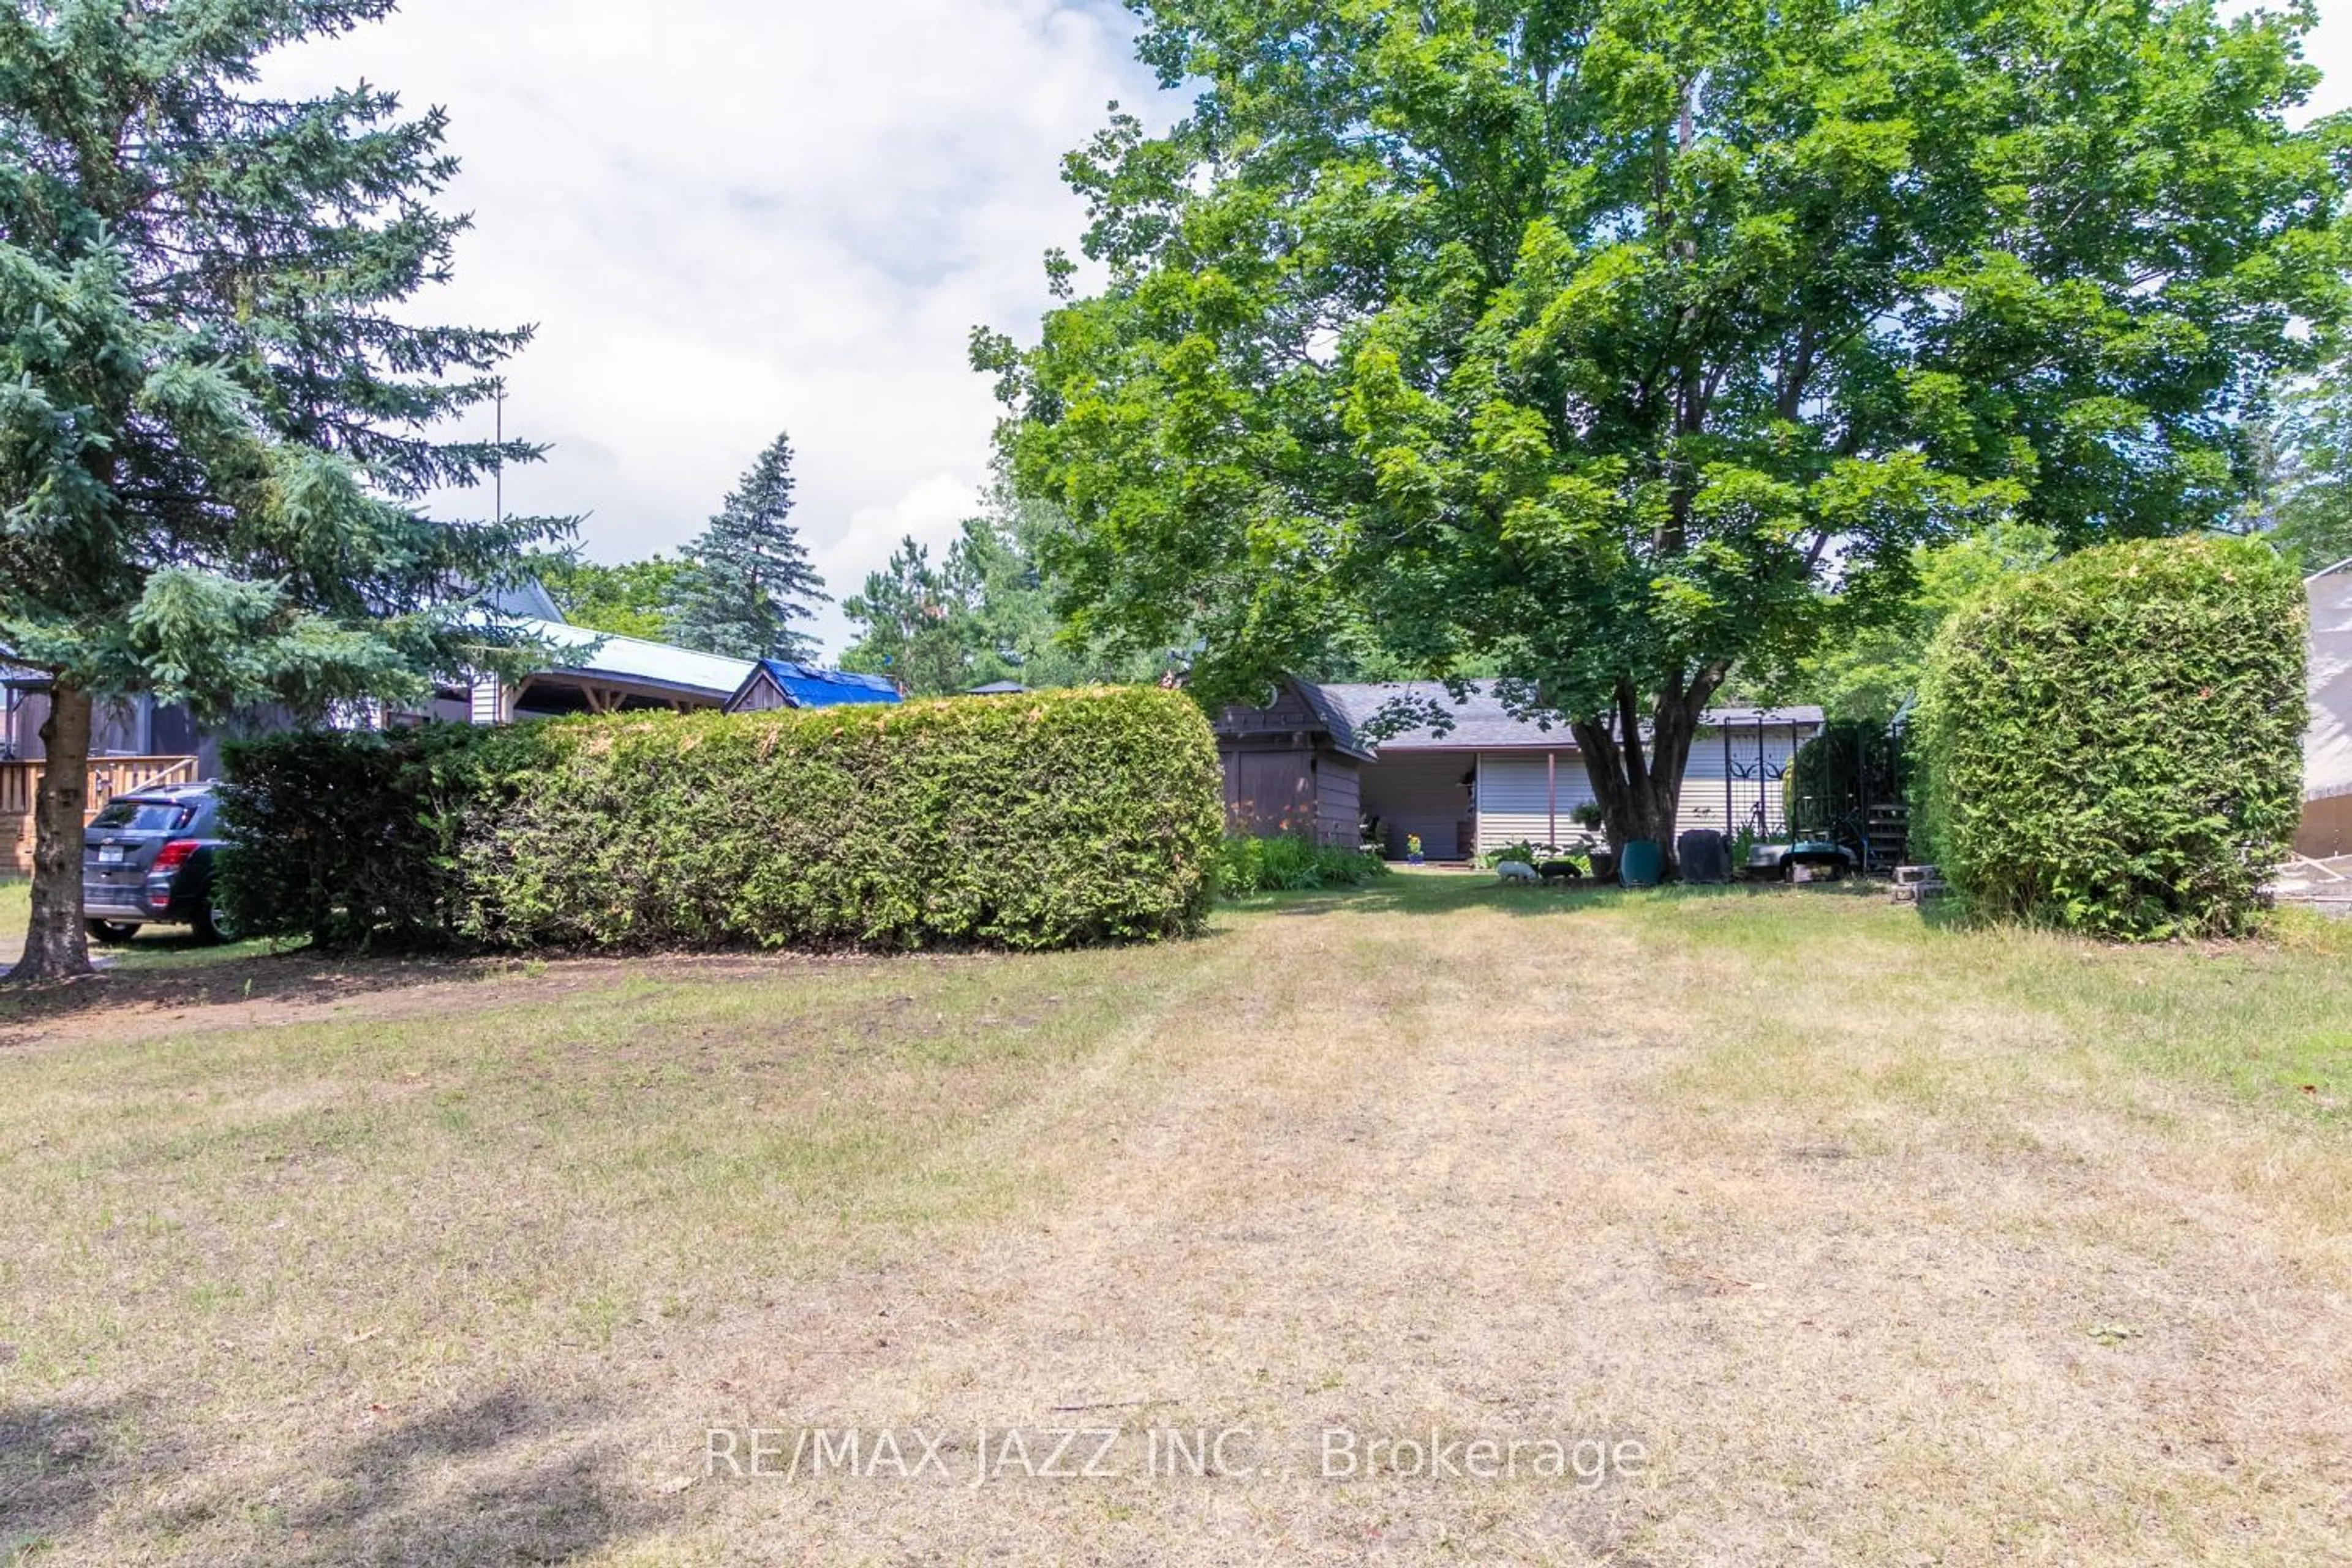 Frontside or backside of a home for 10126 Long Sault Rd #2, Clarington Ontario L0B 1J0